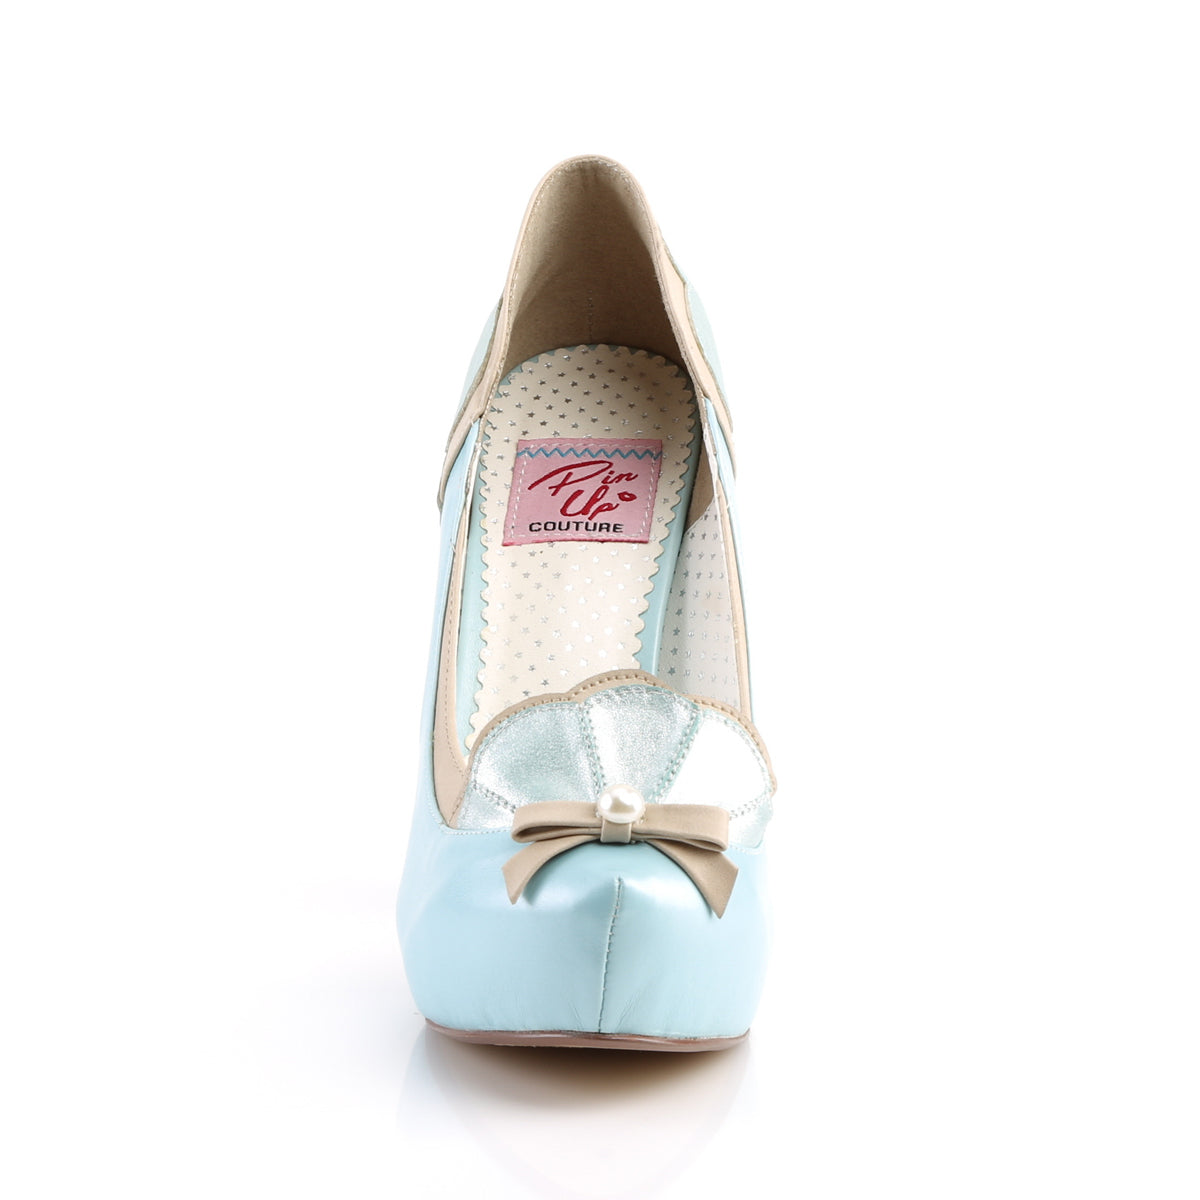 Pin Up Couture Womens Pumps BETTIE-20 B. Blue-Tan Faux Leather